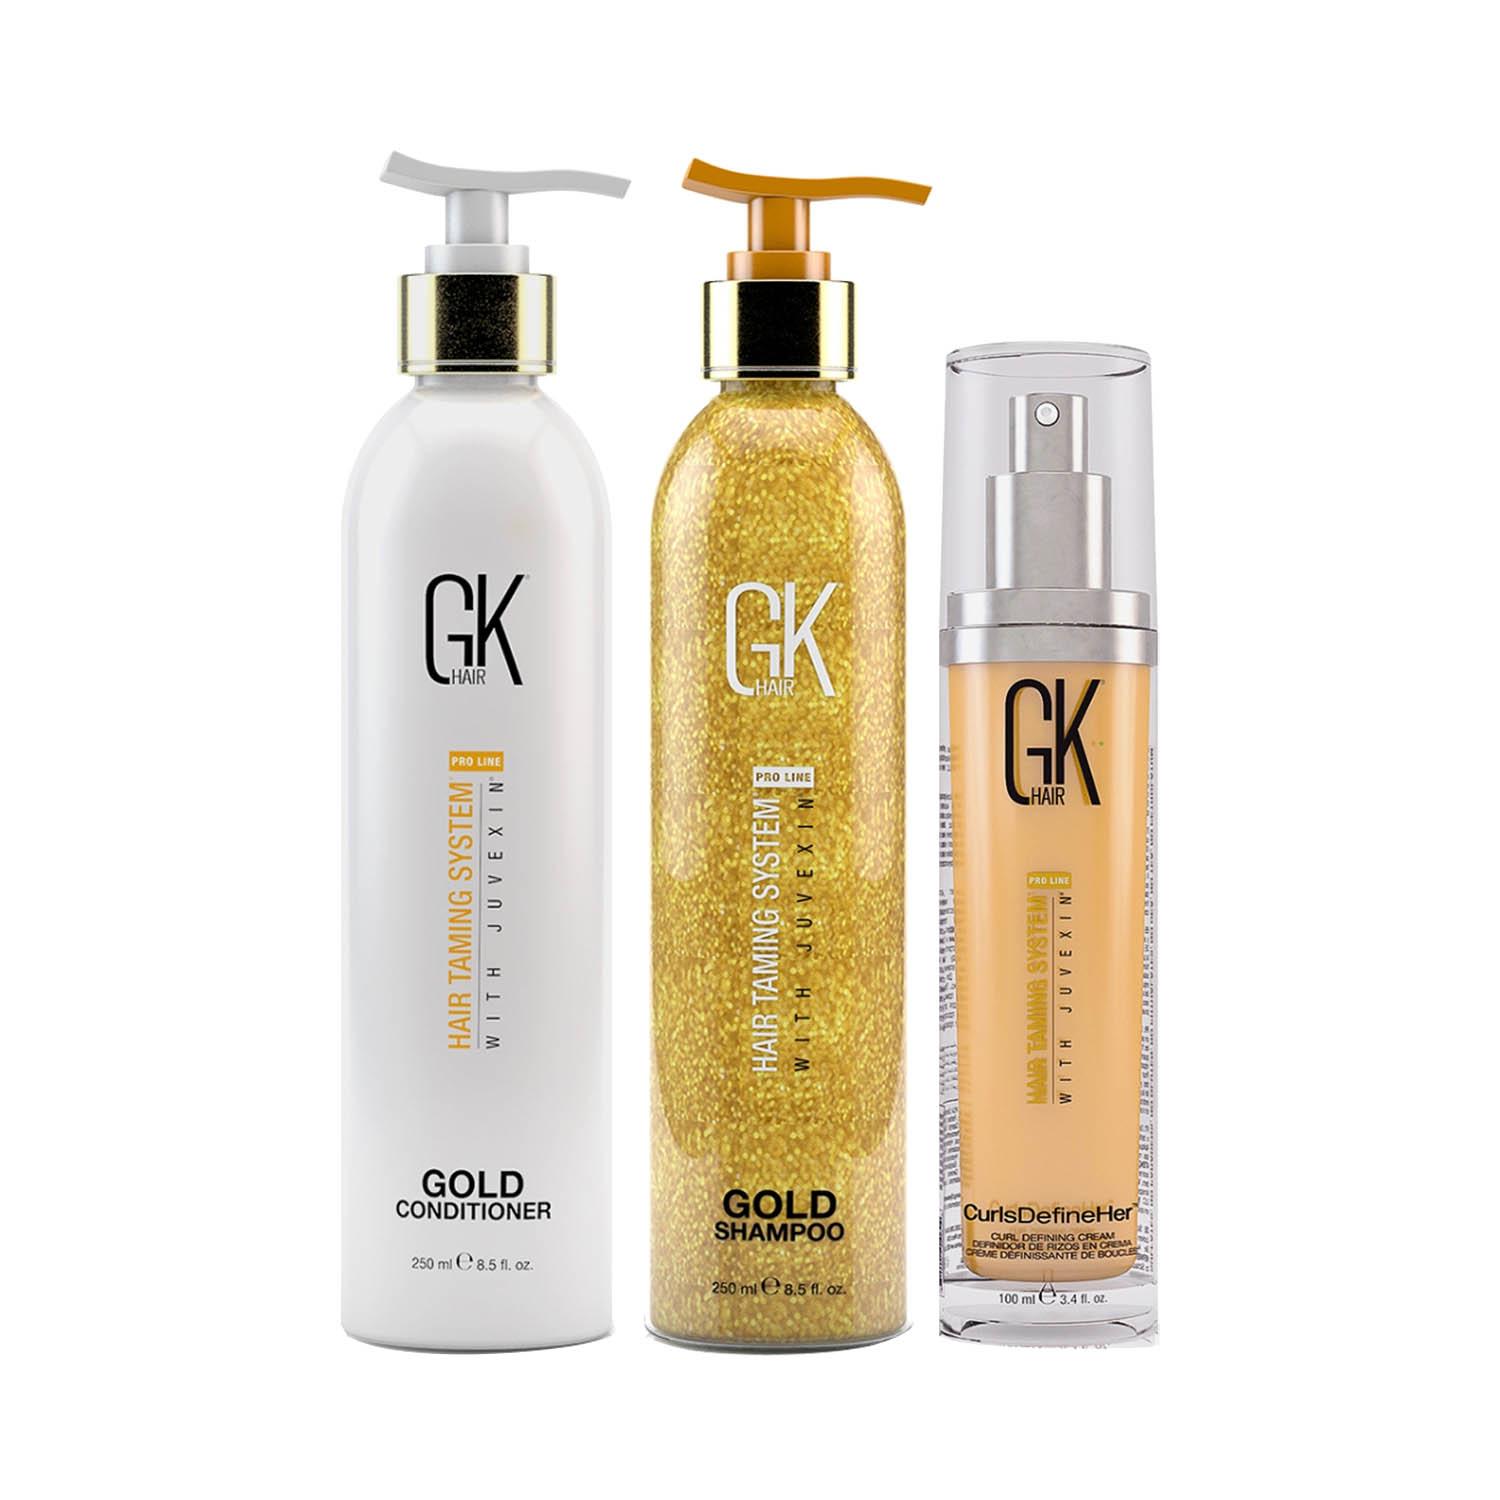 GK Hair | GK Hair Gold Shampoo and Conditioner 250ml with Curls Defineher Her 100ml